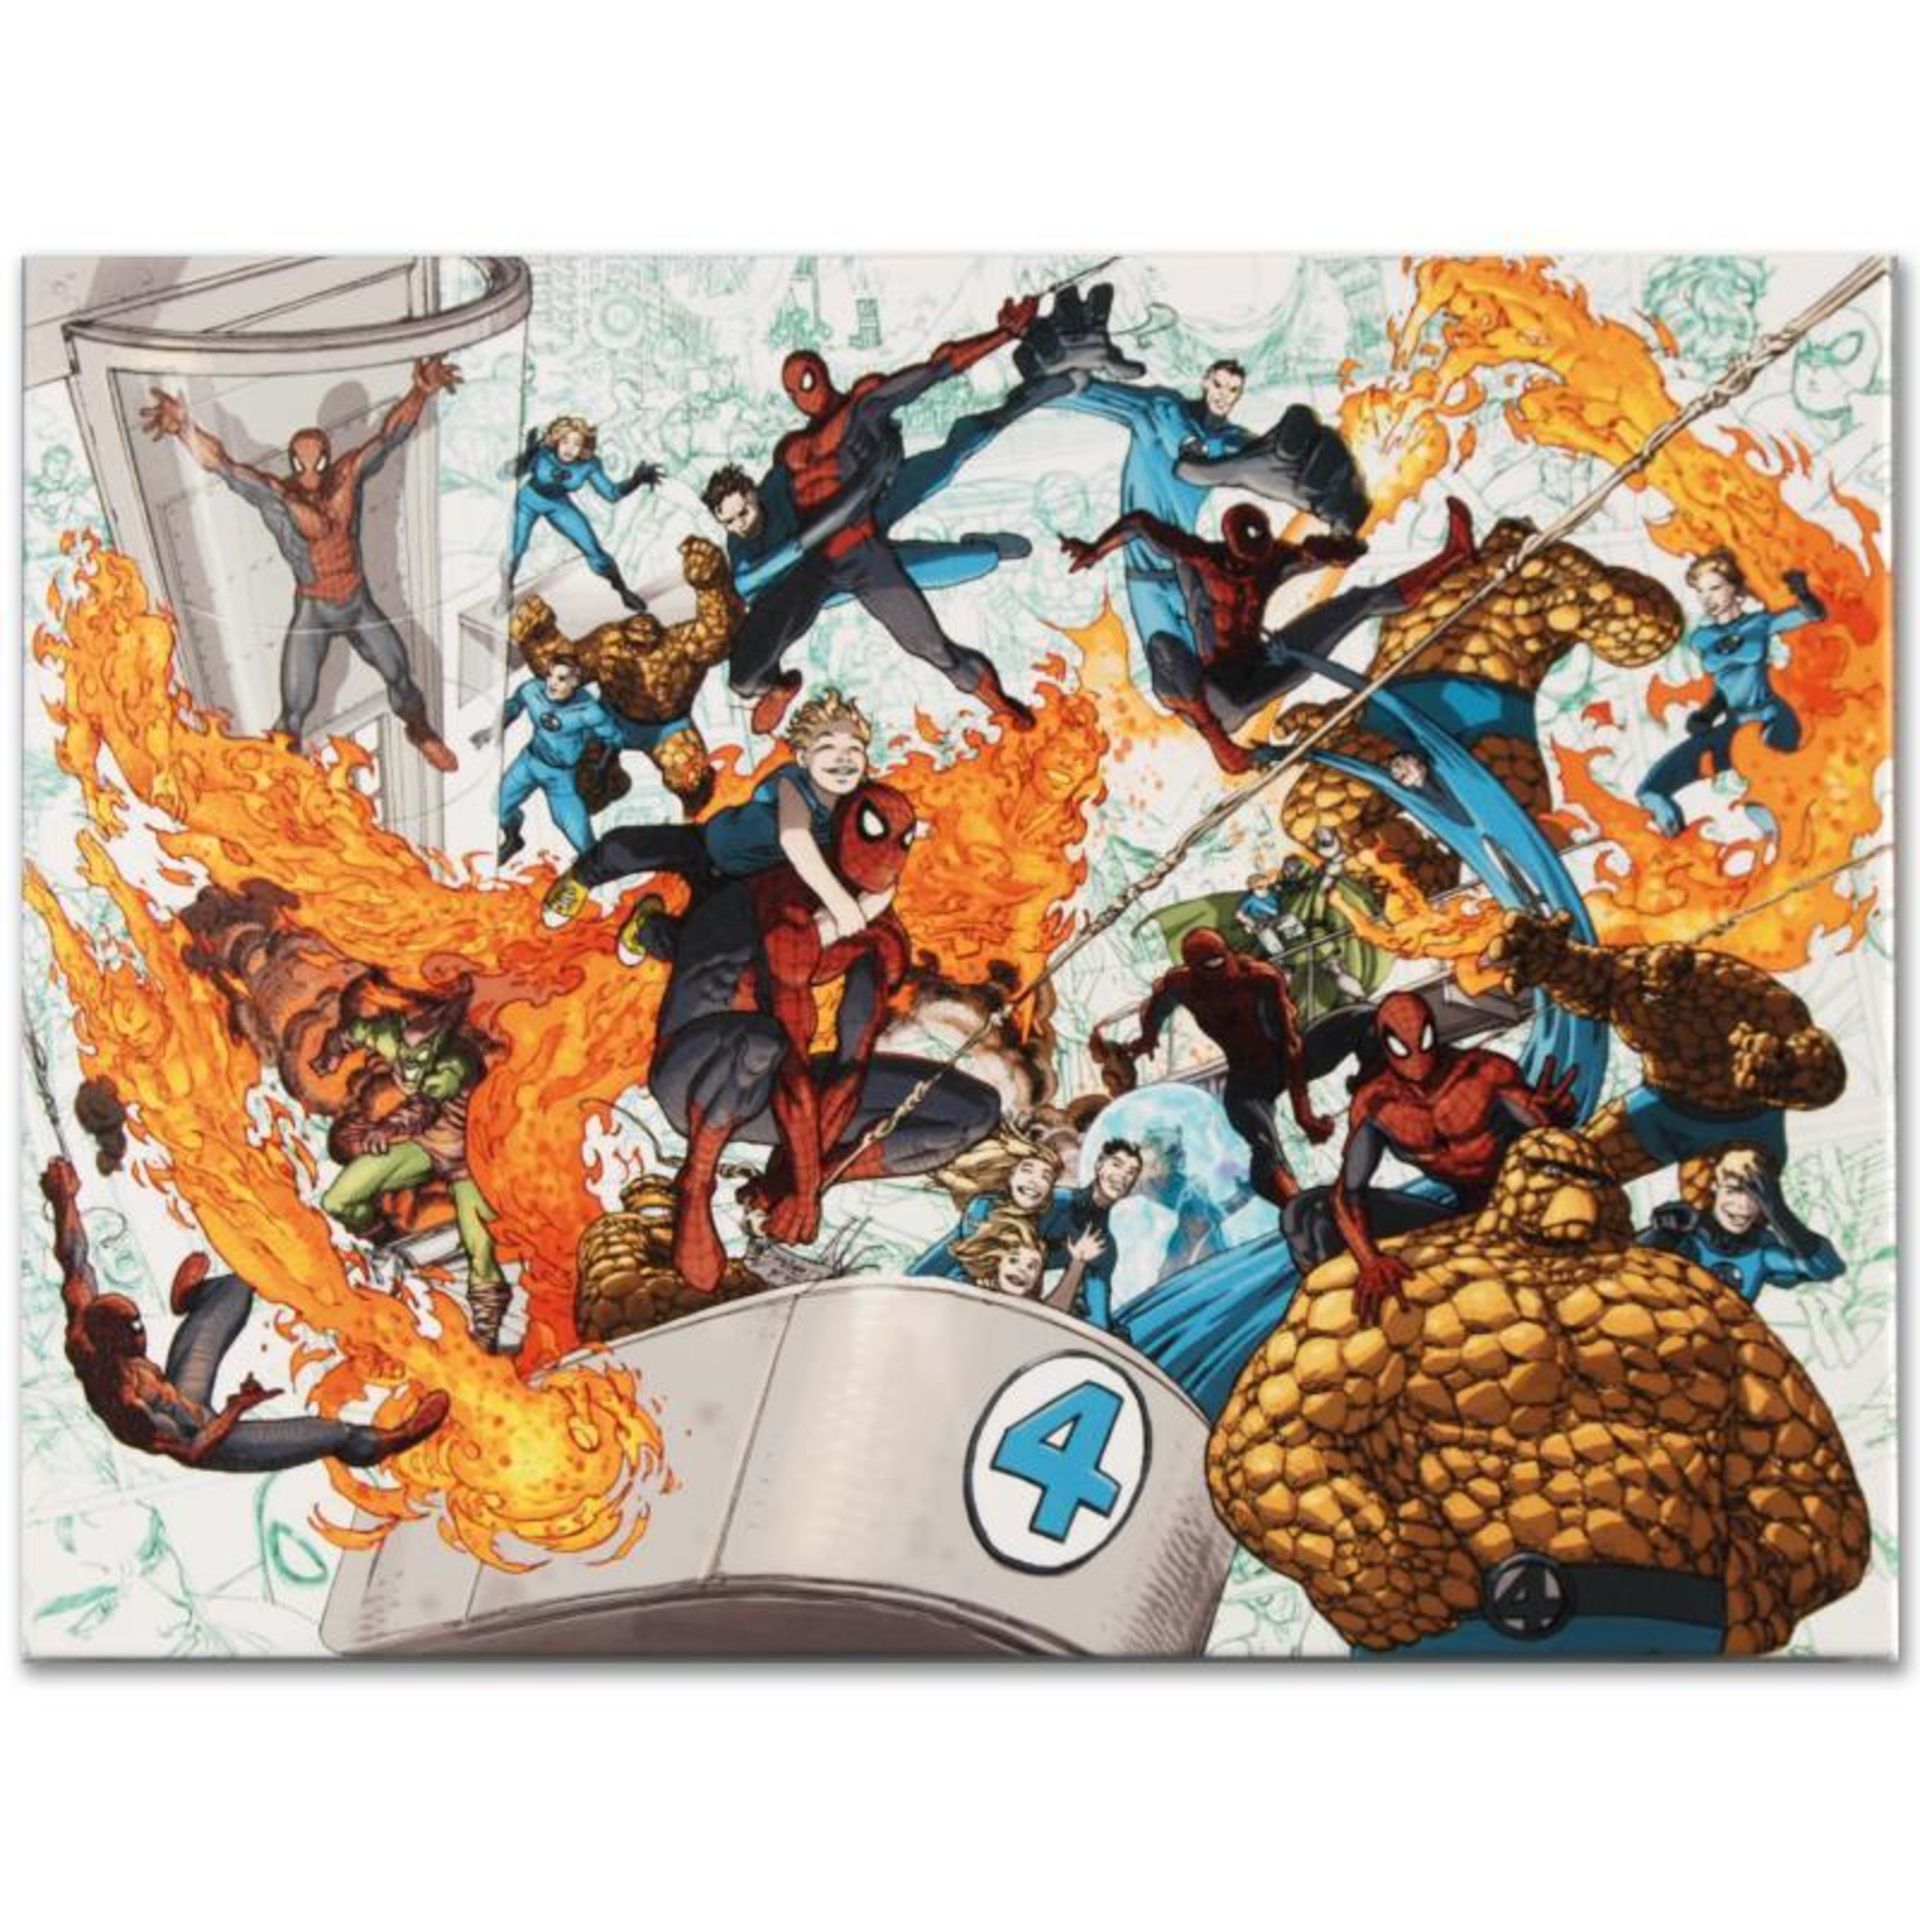 Marvel Comics "Spider-Man/Fantastic Four #4" Numbered Limited Edition Giclee on